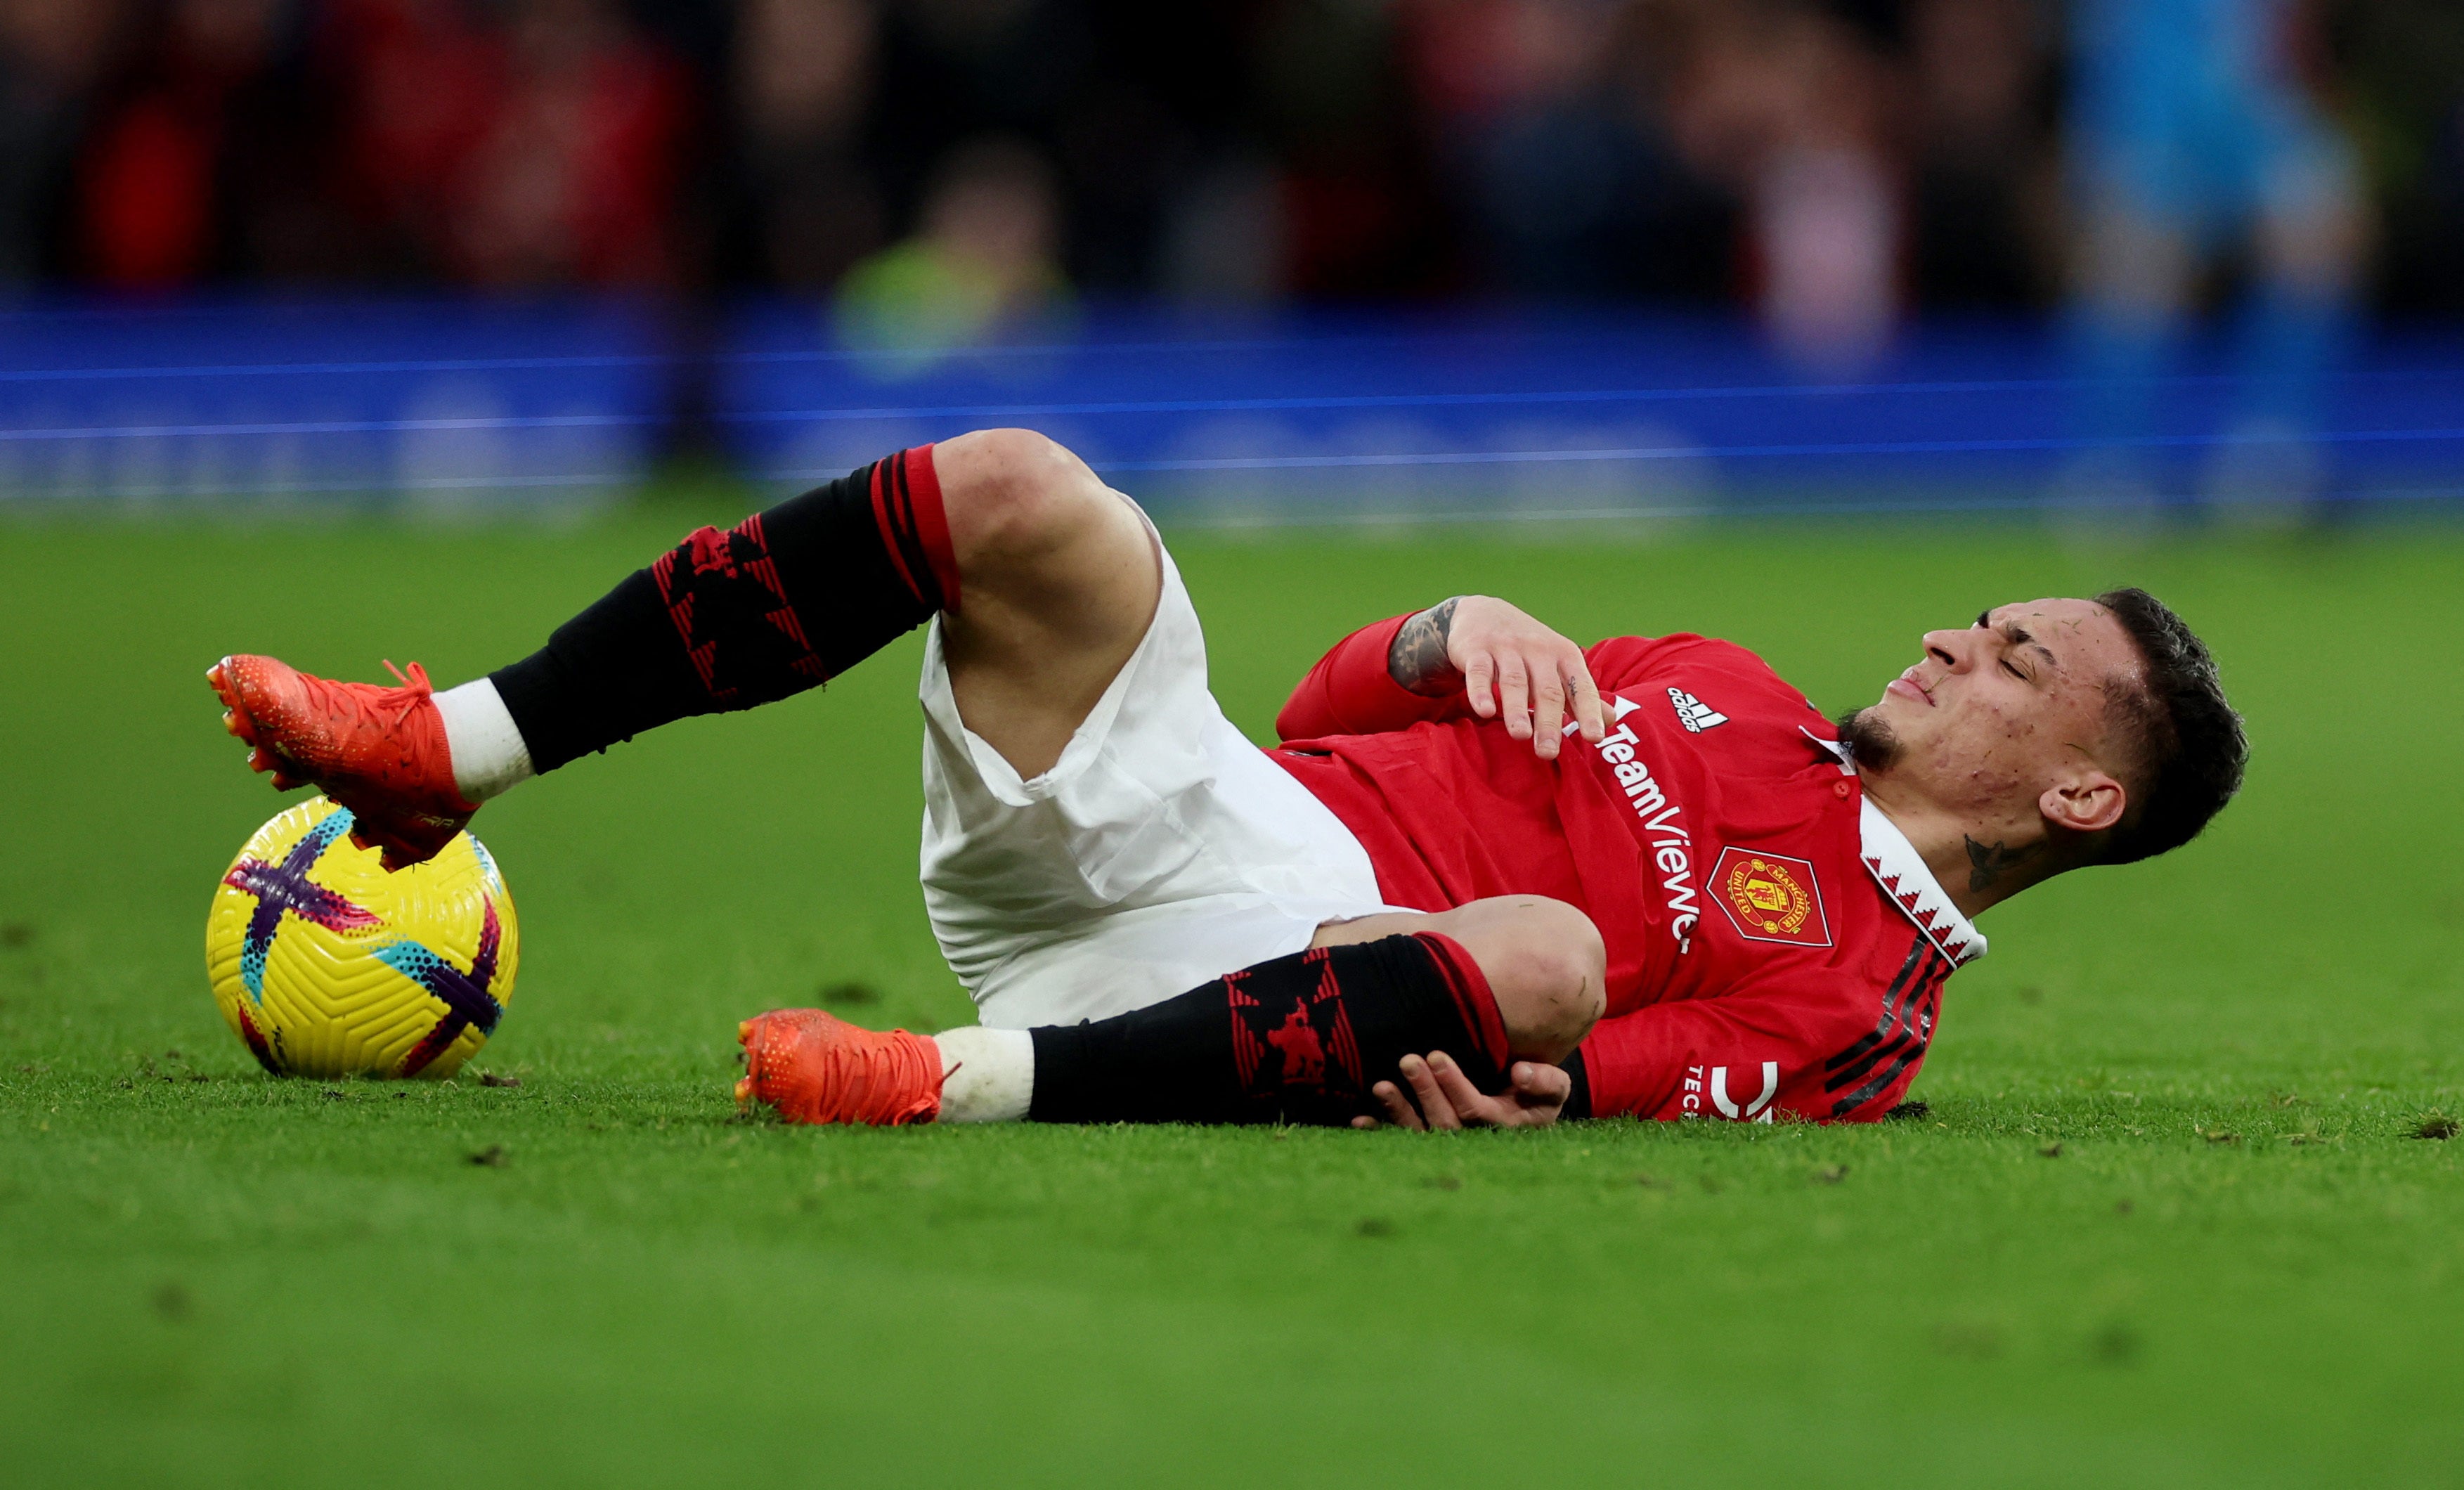 Antony goes down injured during Manchester United’s match with Crystal Palace